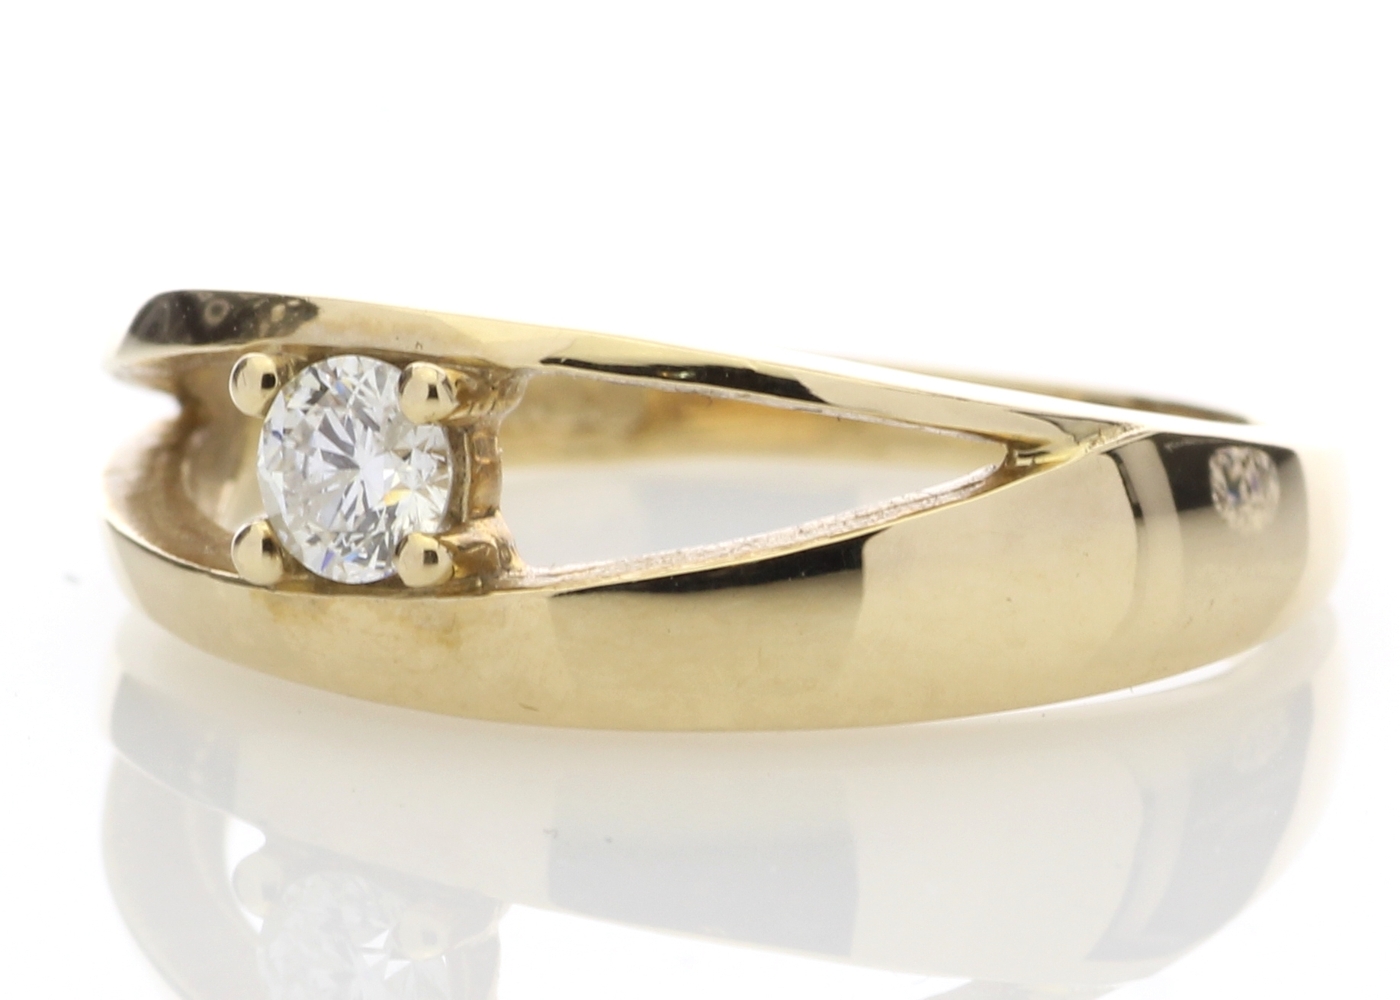 9ct Yellow Gold Claw Set Diamond Ring 0.18 Carats - Image 2 of 4